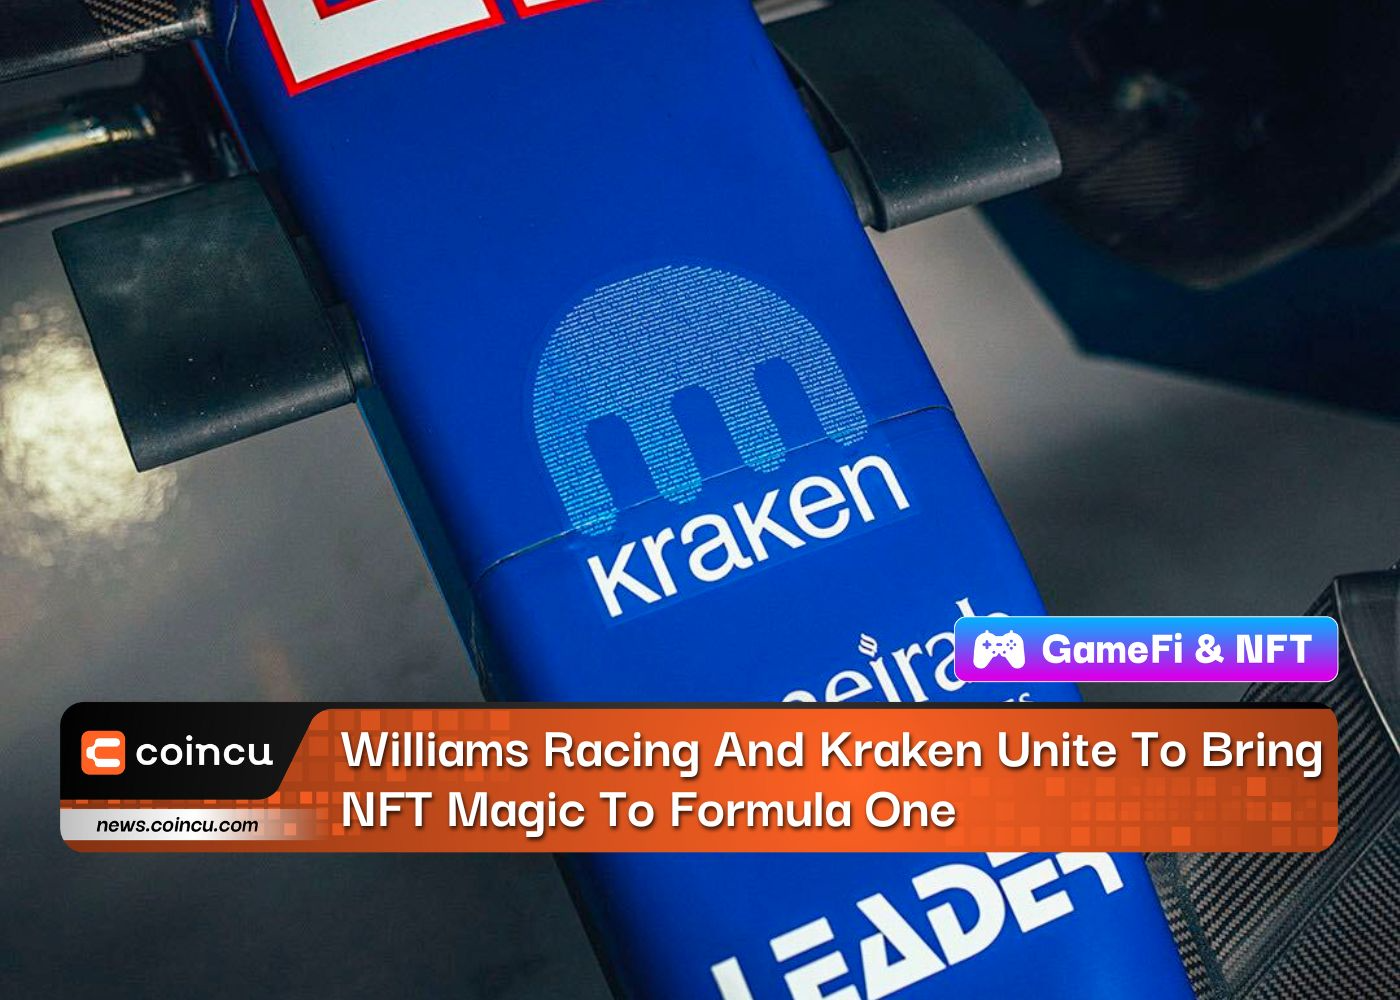 Williams Racing And Kraken Unite To Bring NFT Magic To Formula One